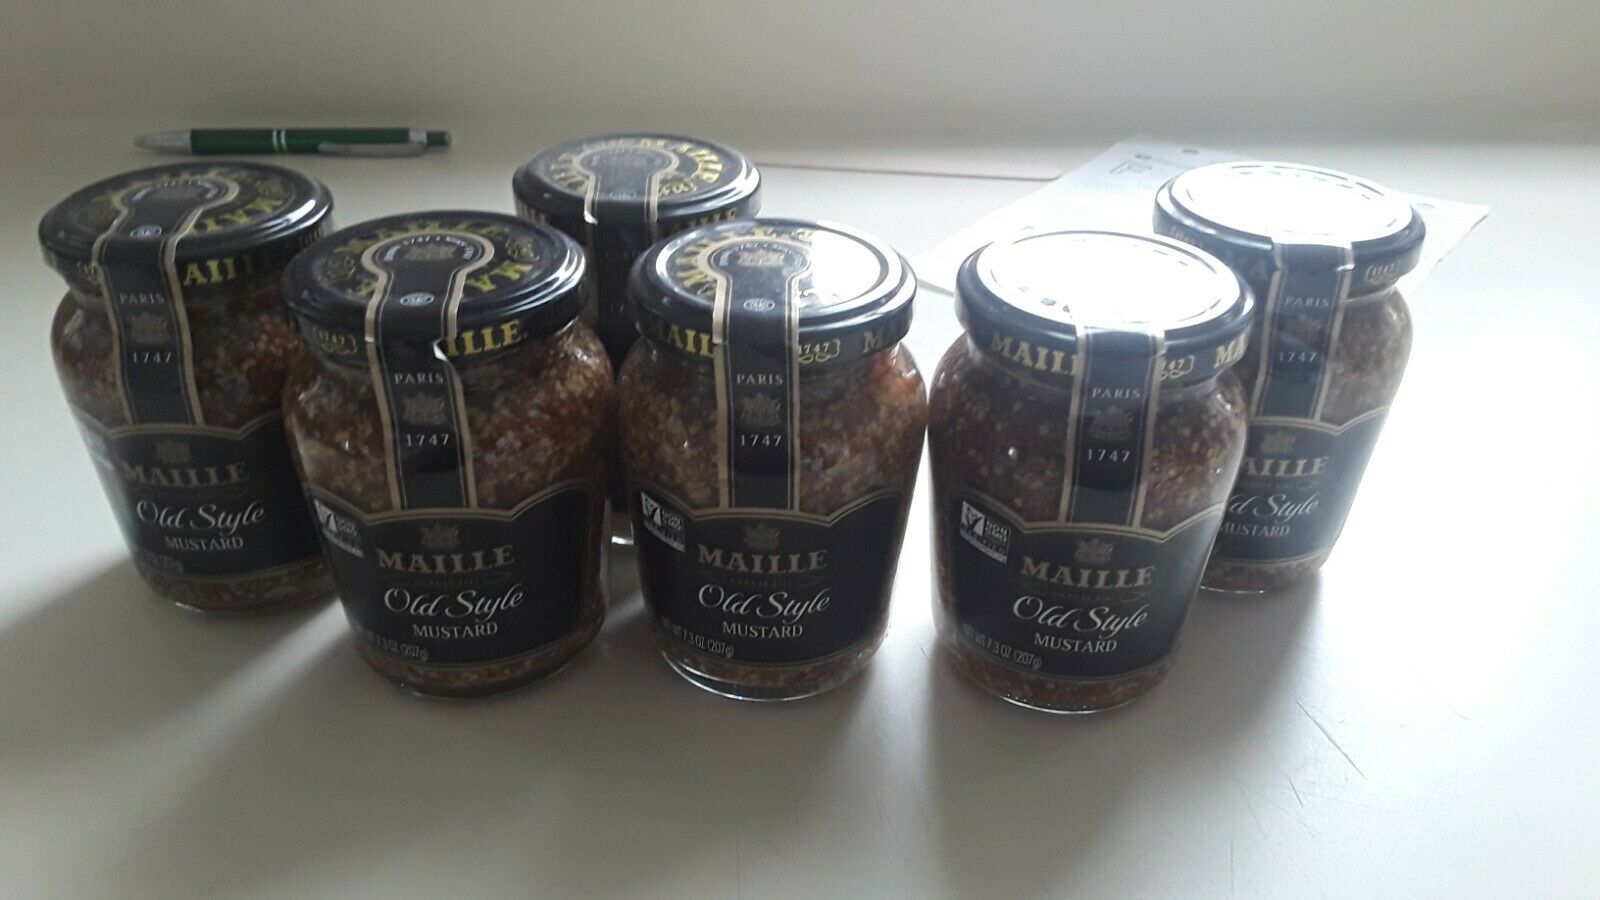 (6) Maille Mustard Whole Grain Old Style Mustard (7.3 Oz Glass Jar) *sealed*